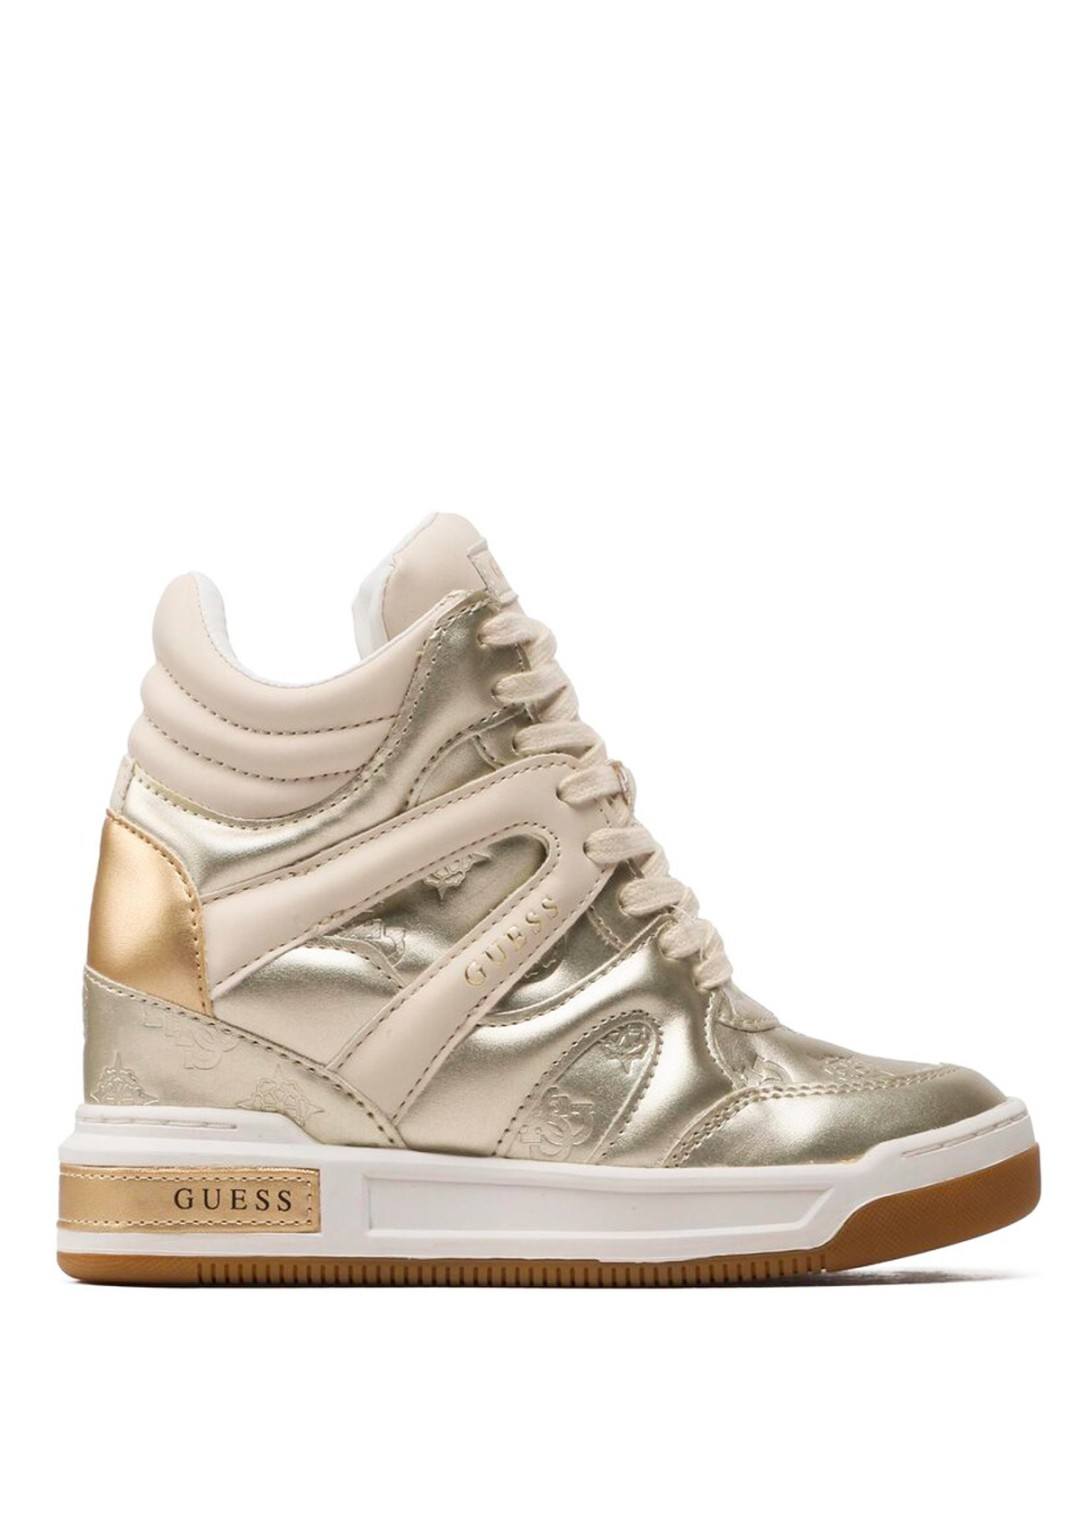 Guess - Sneakers Zeppa - Donna - FL5LISFAL 12